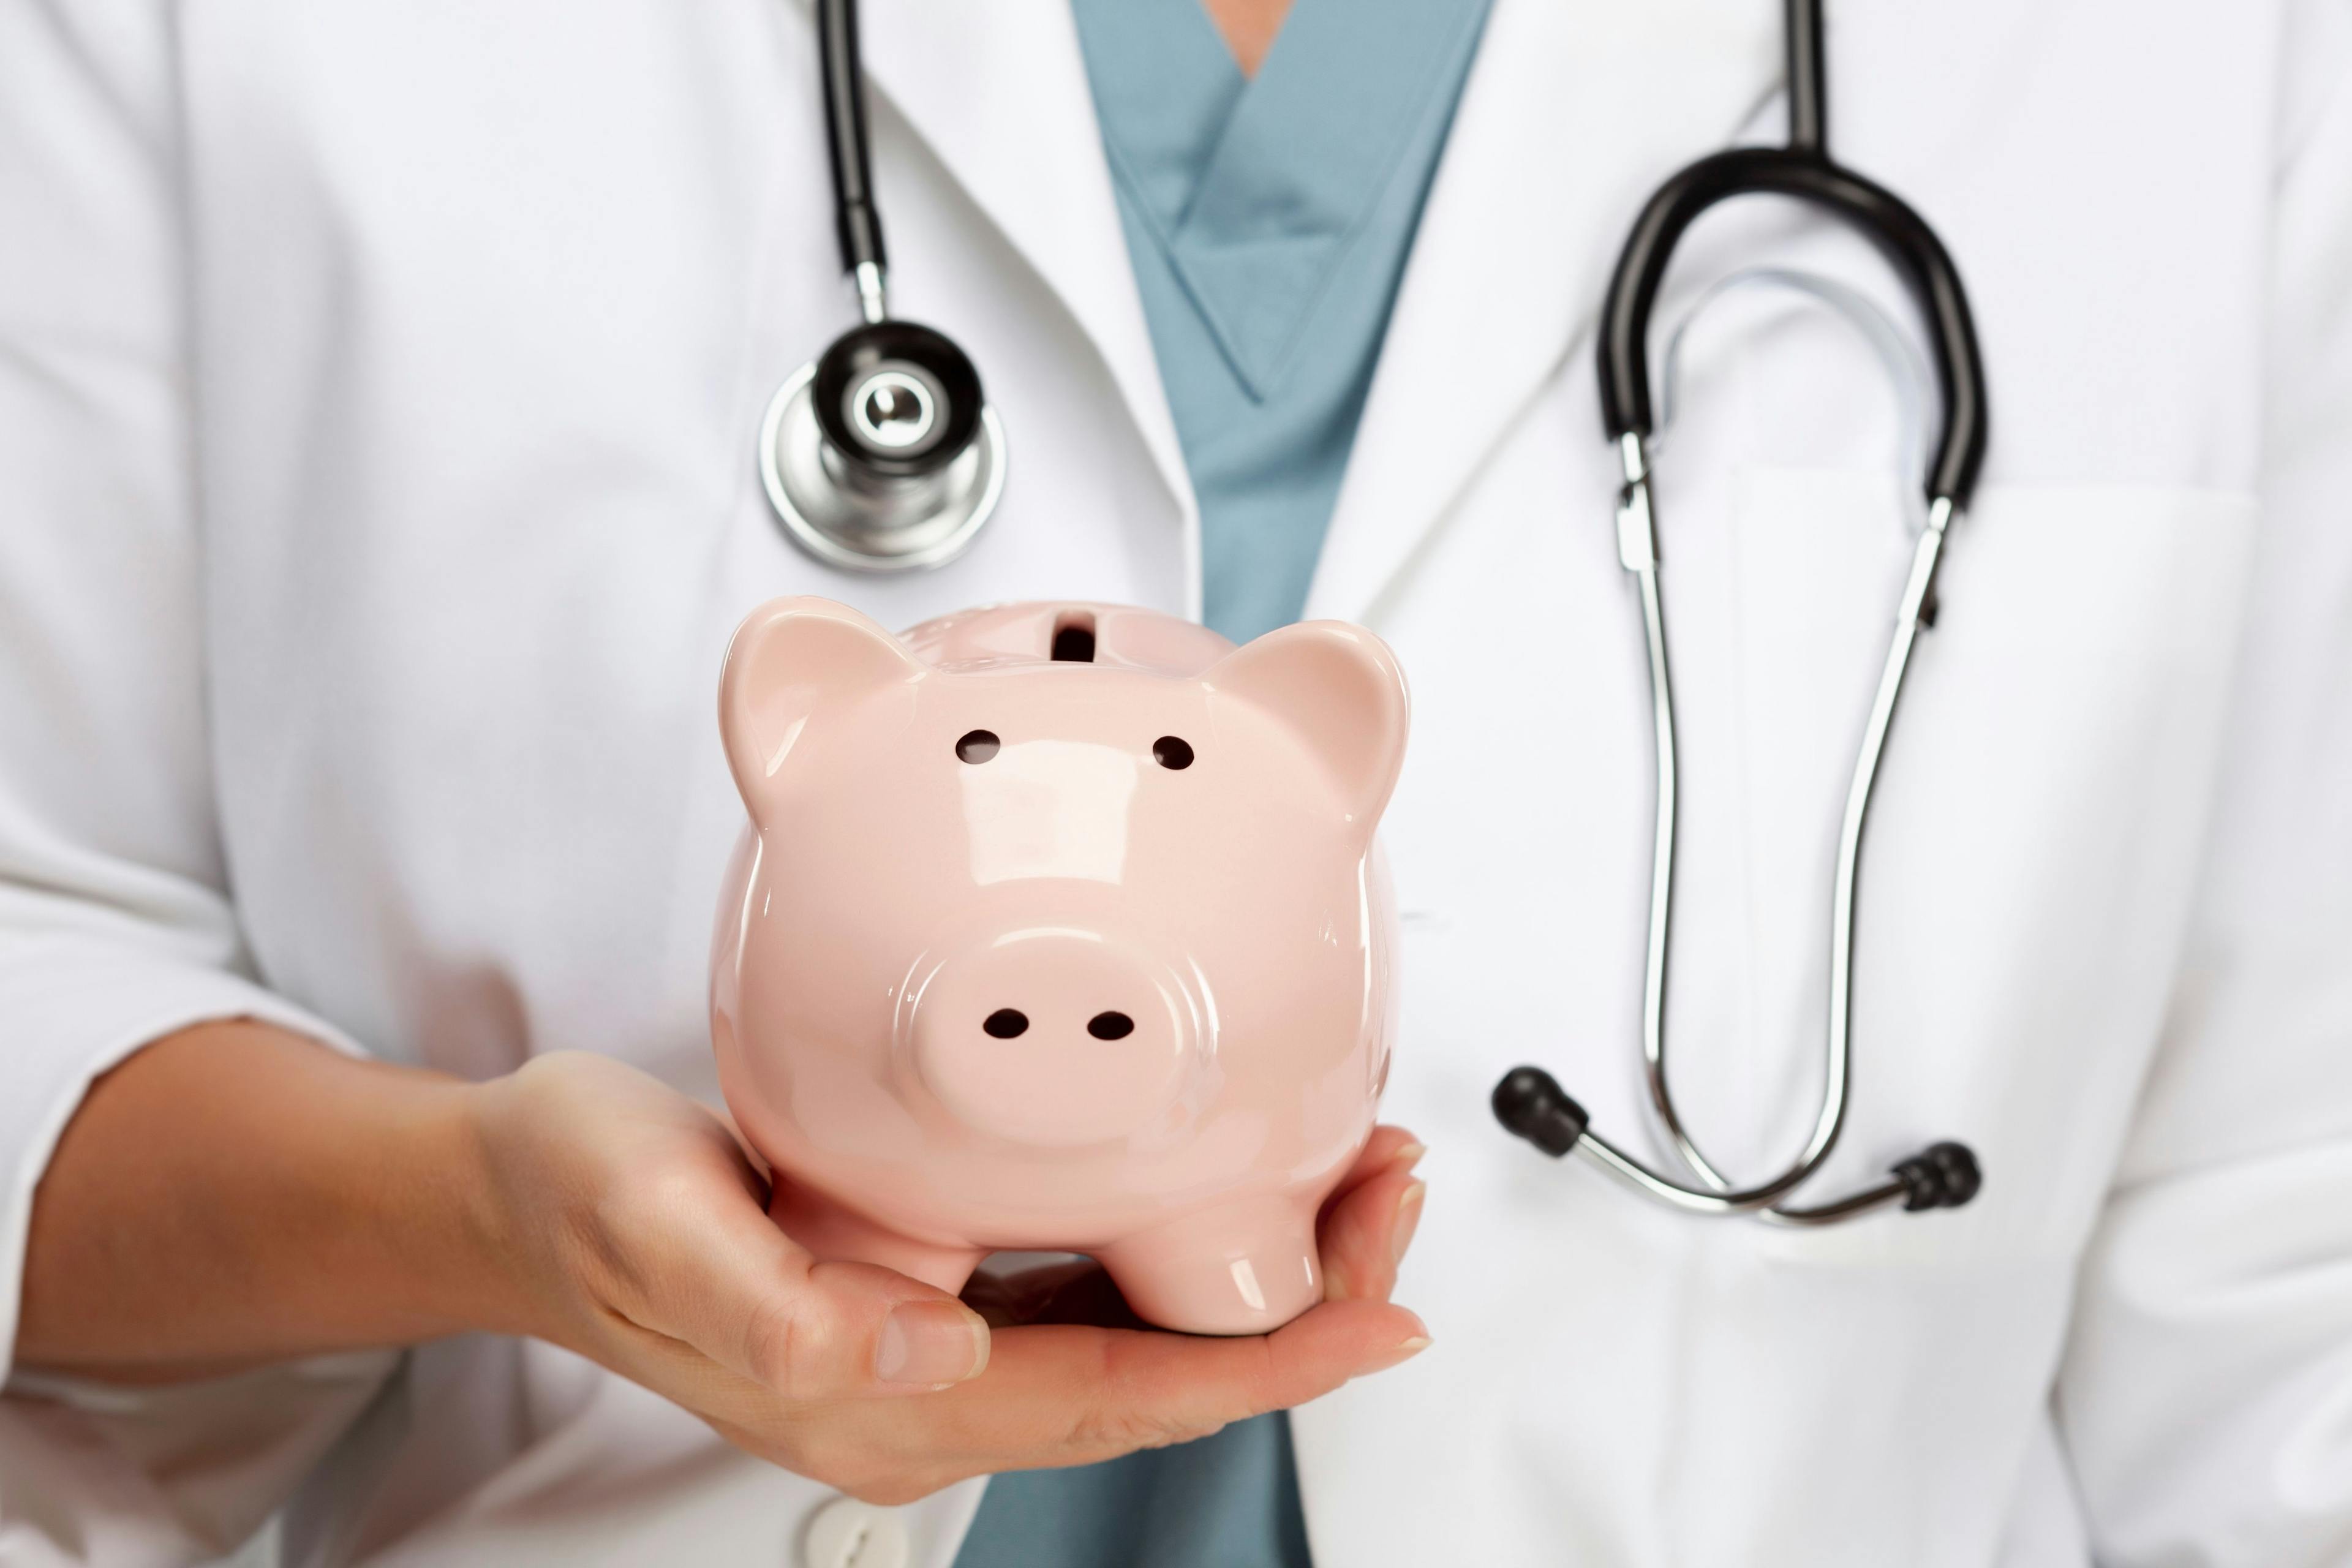 Doctor Holding Piggy Bank | image credit: Andy Dean - stock.adobe.com